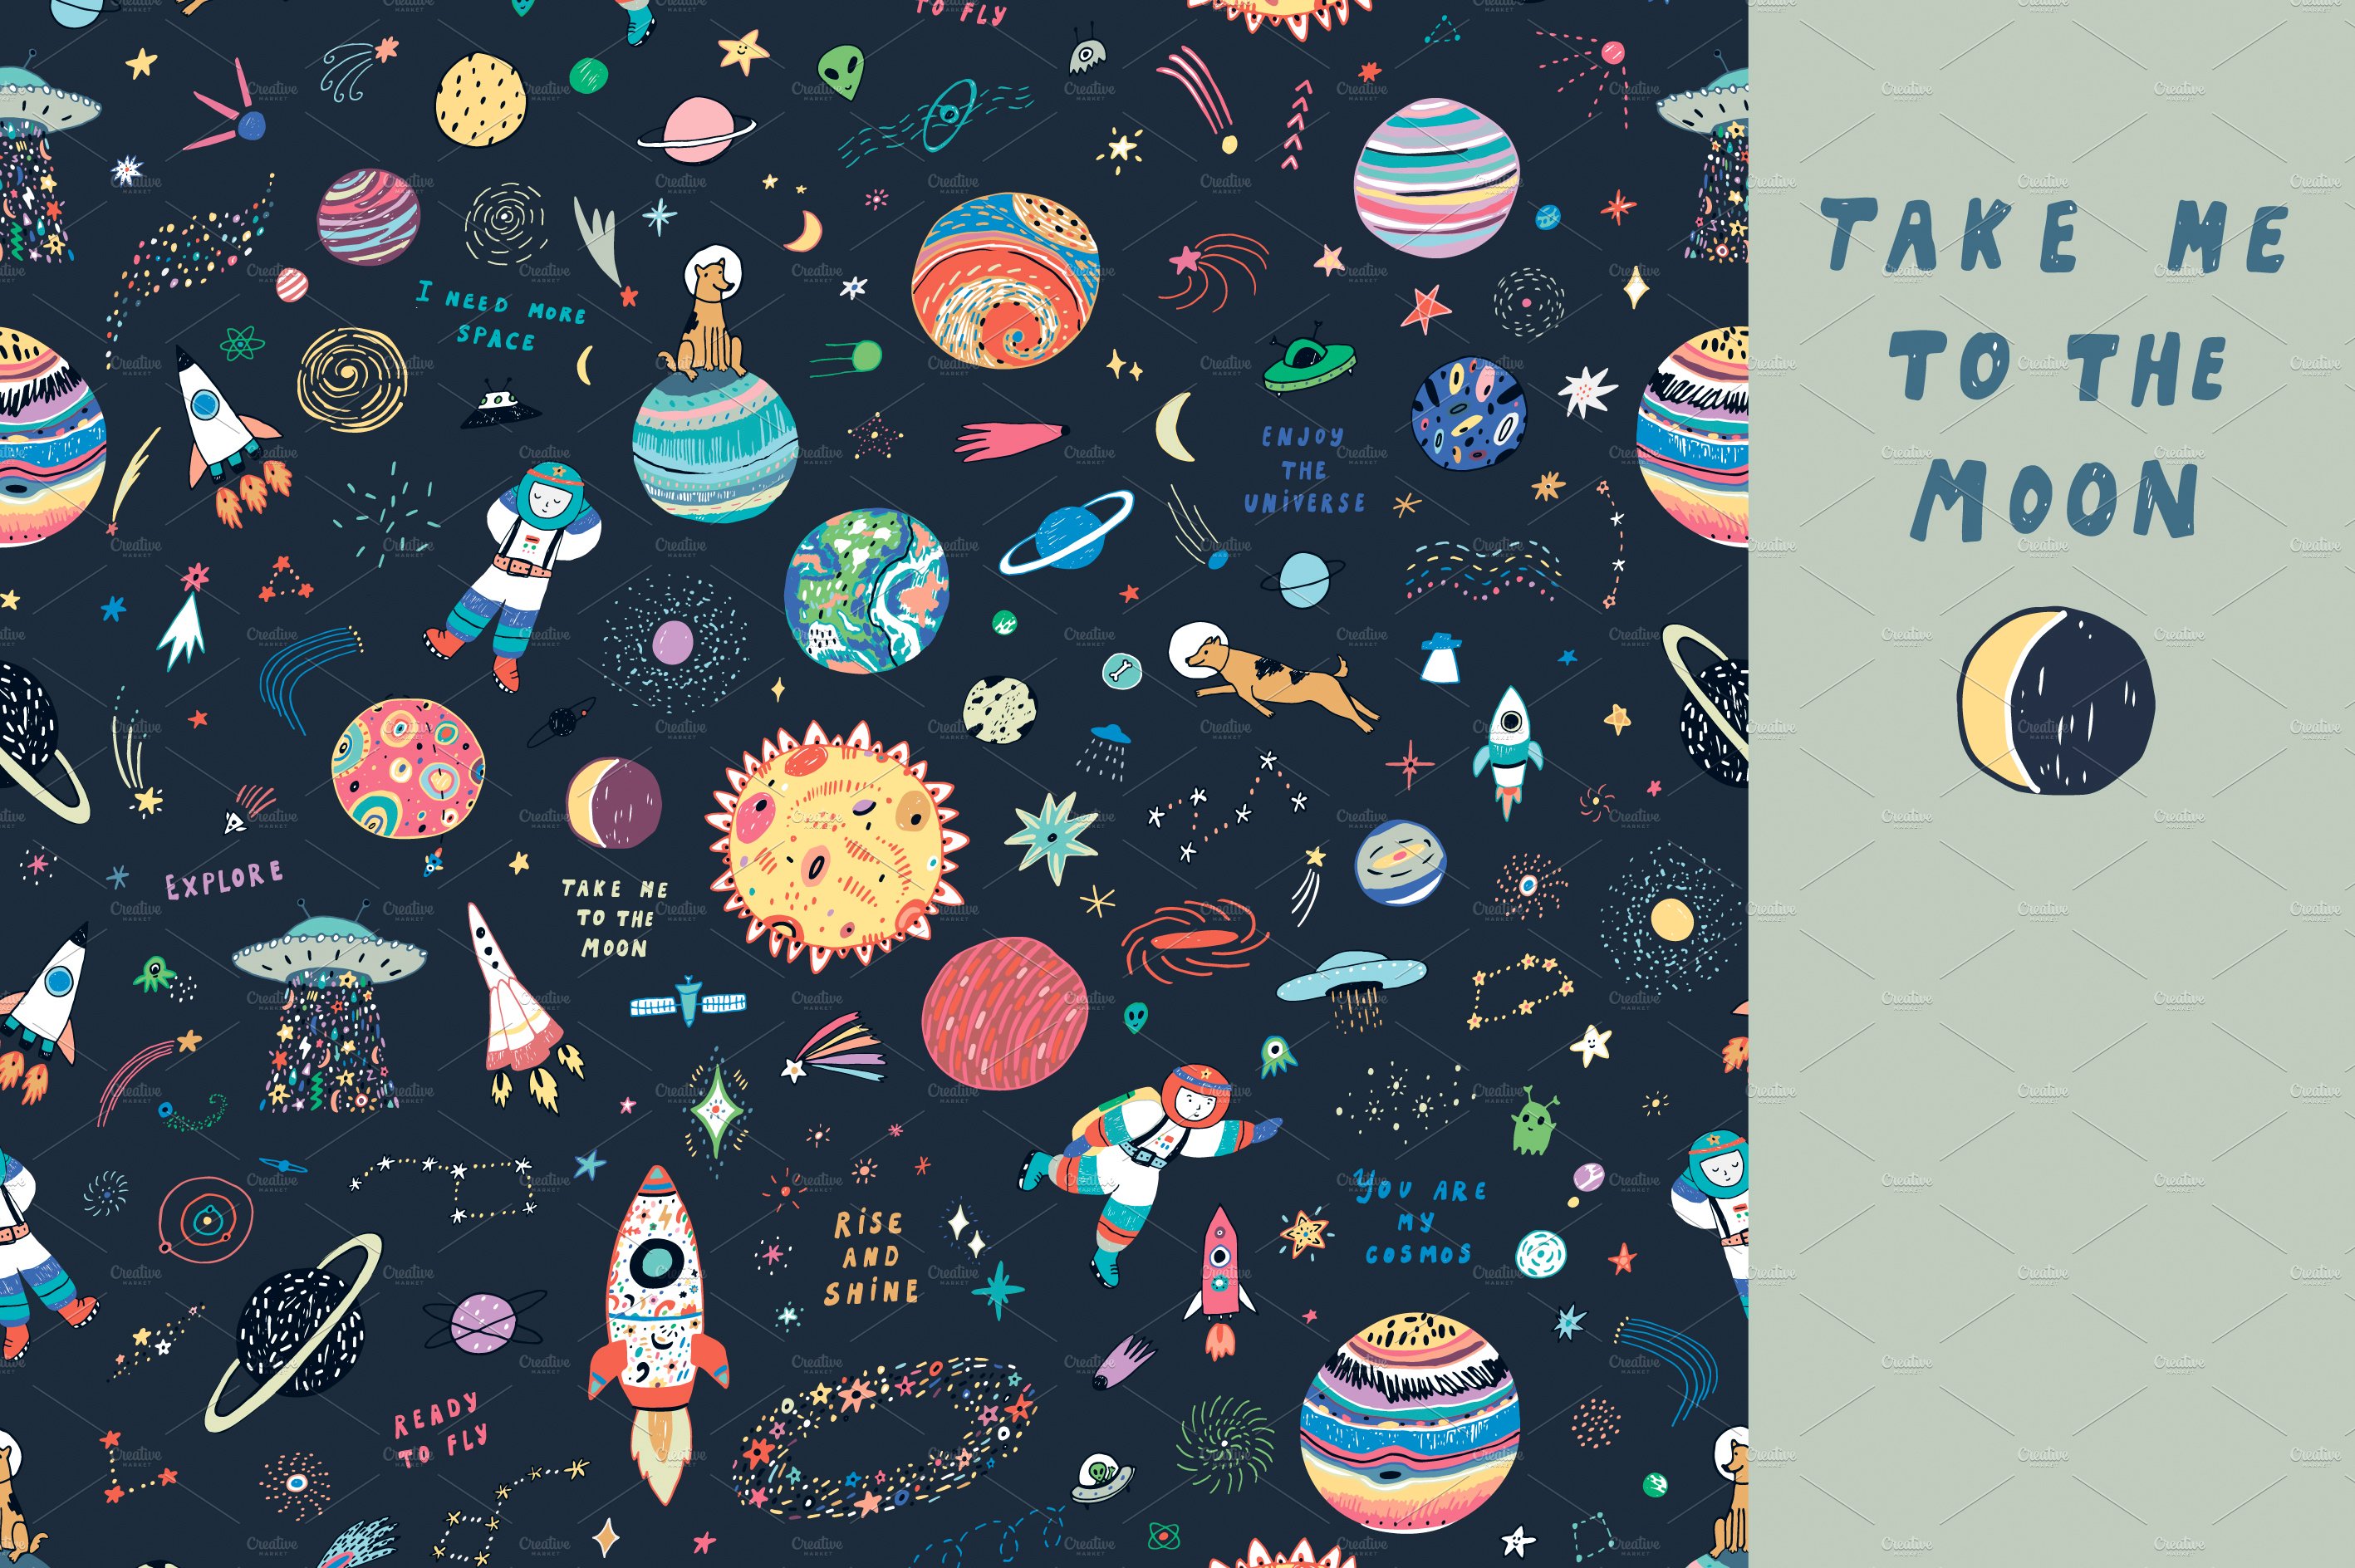 Take me to the Moon cover image.